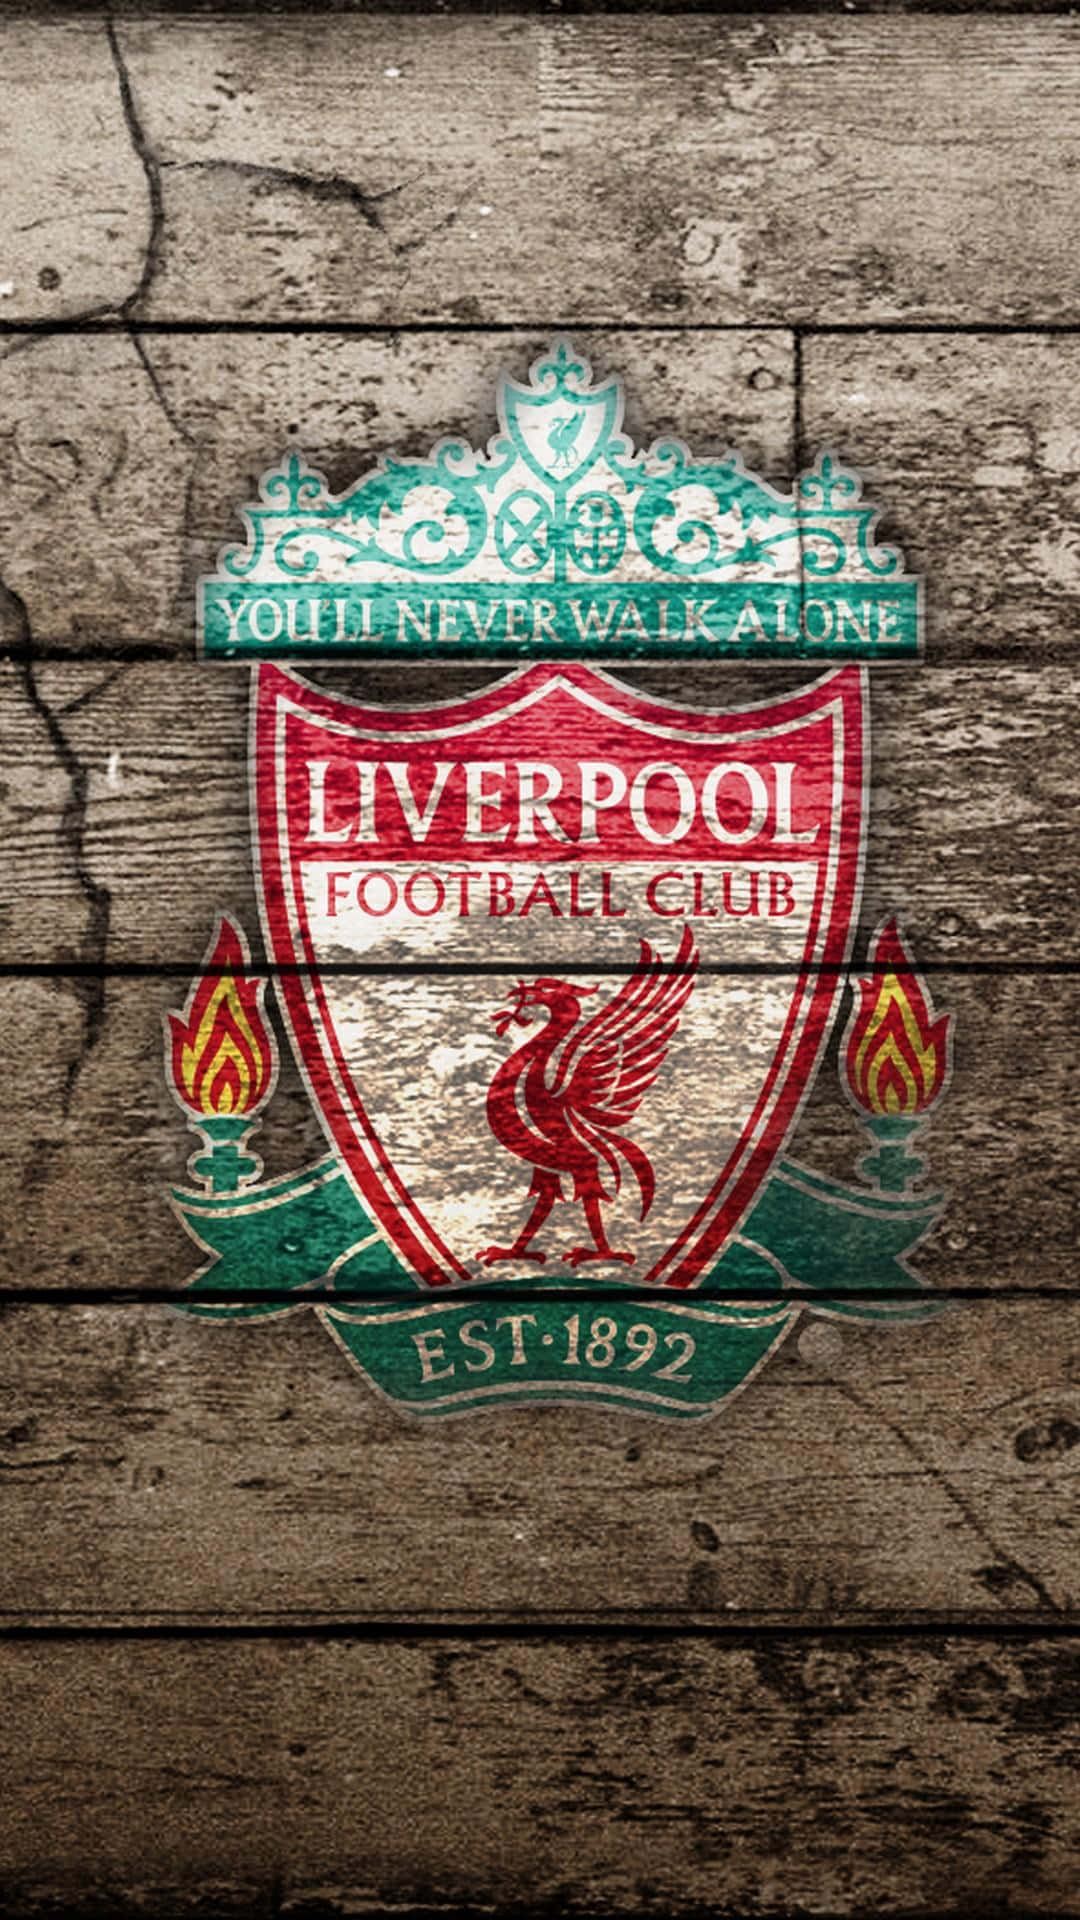 “The Heart of Anfield: Liverpool Football Club”